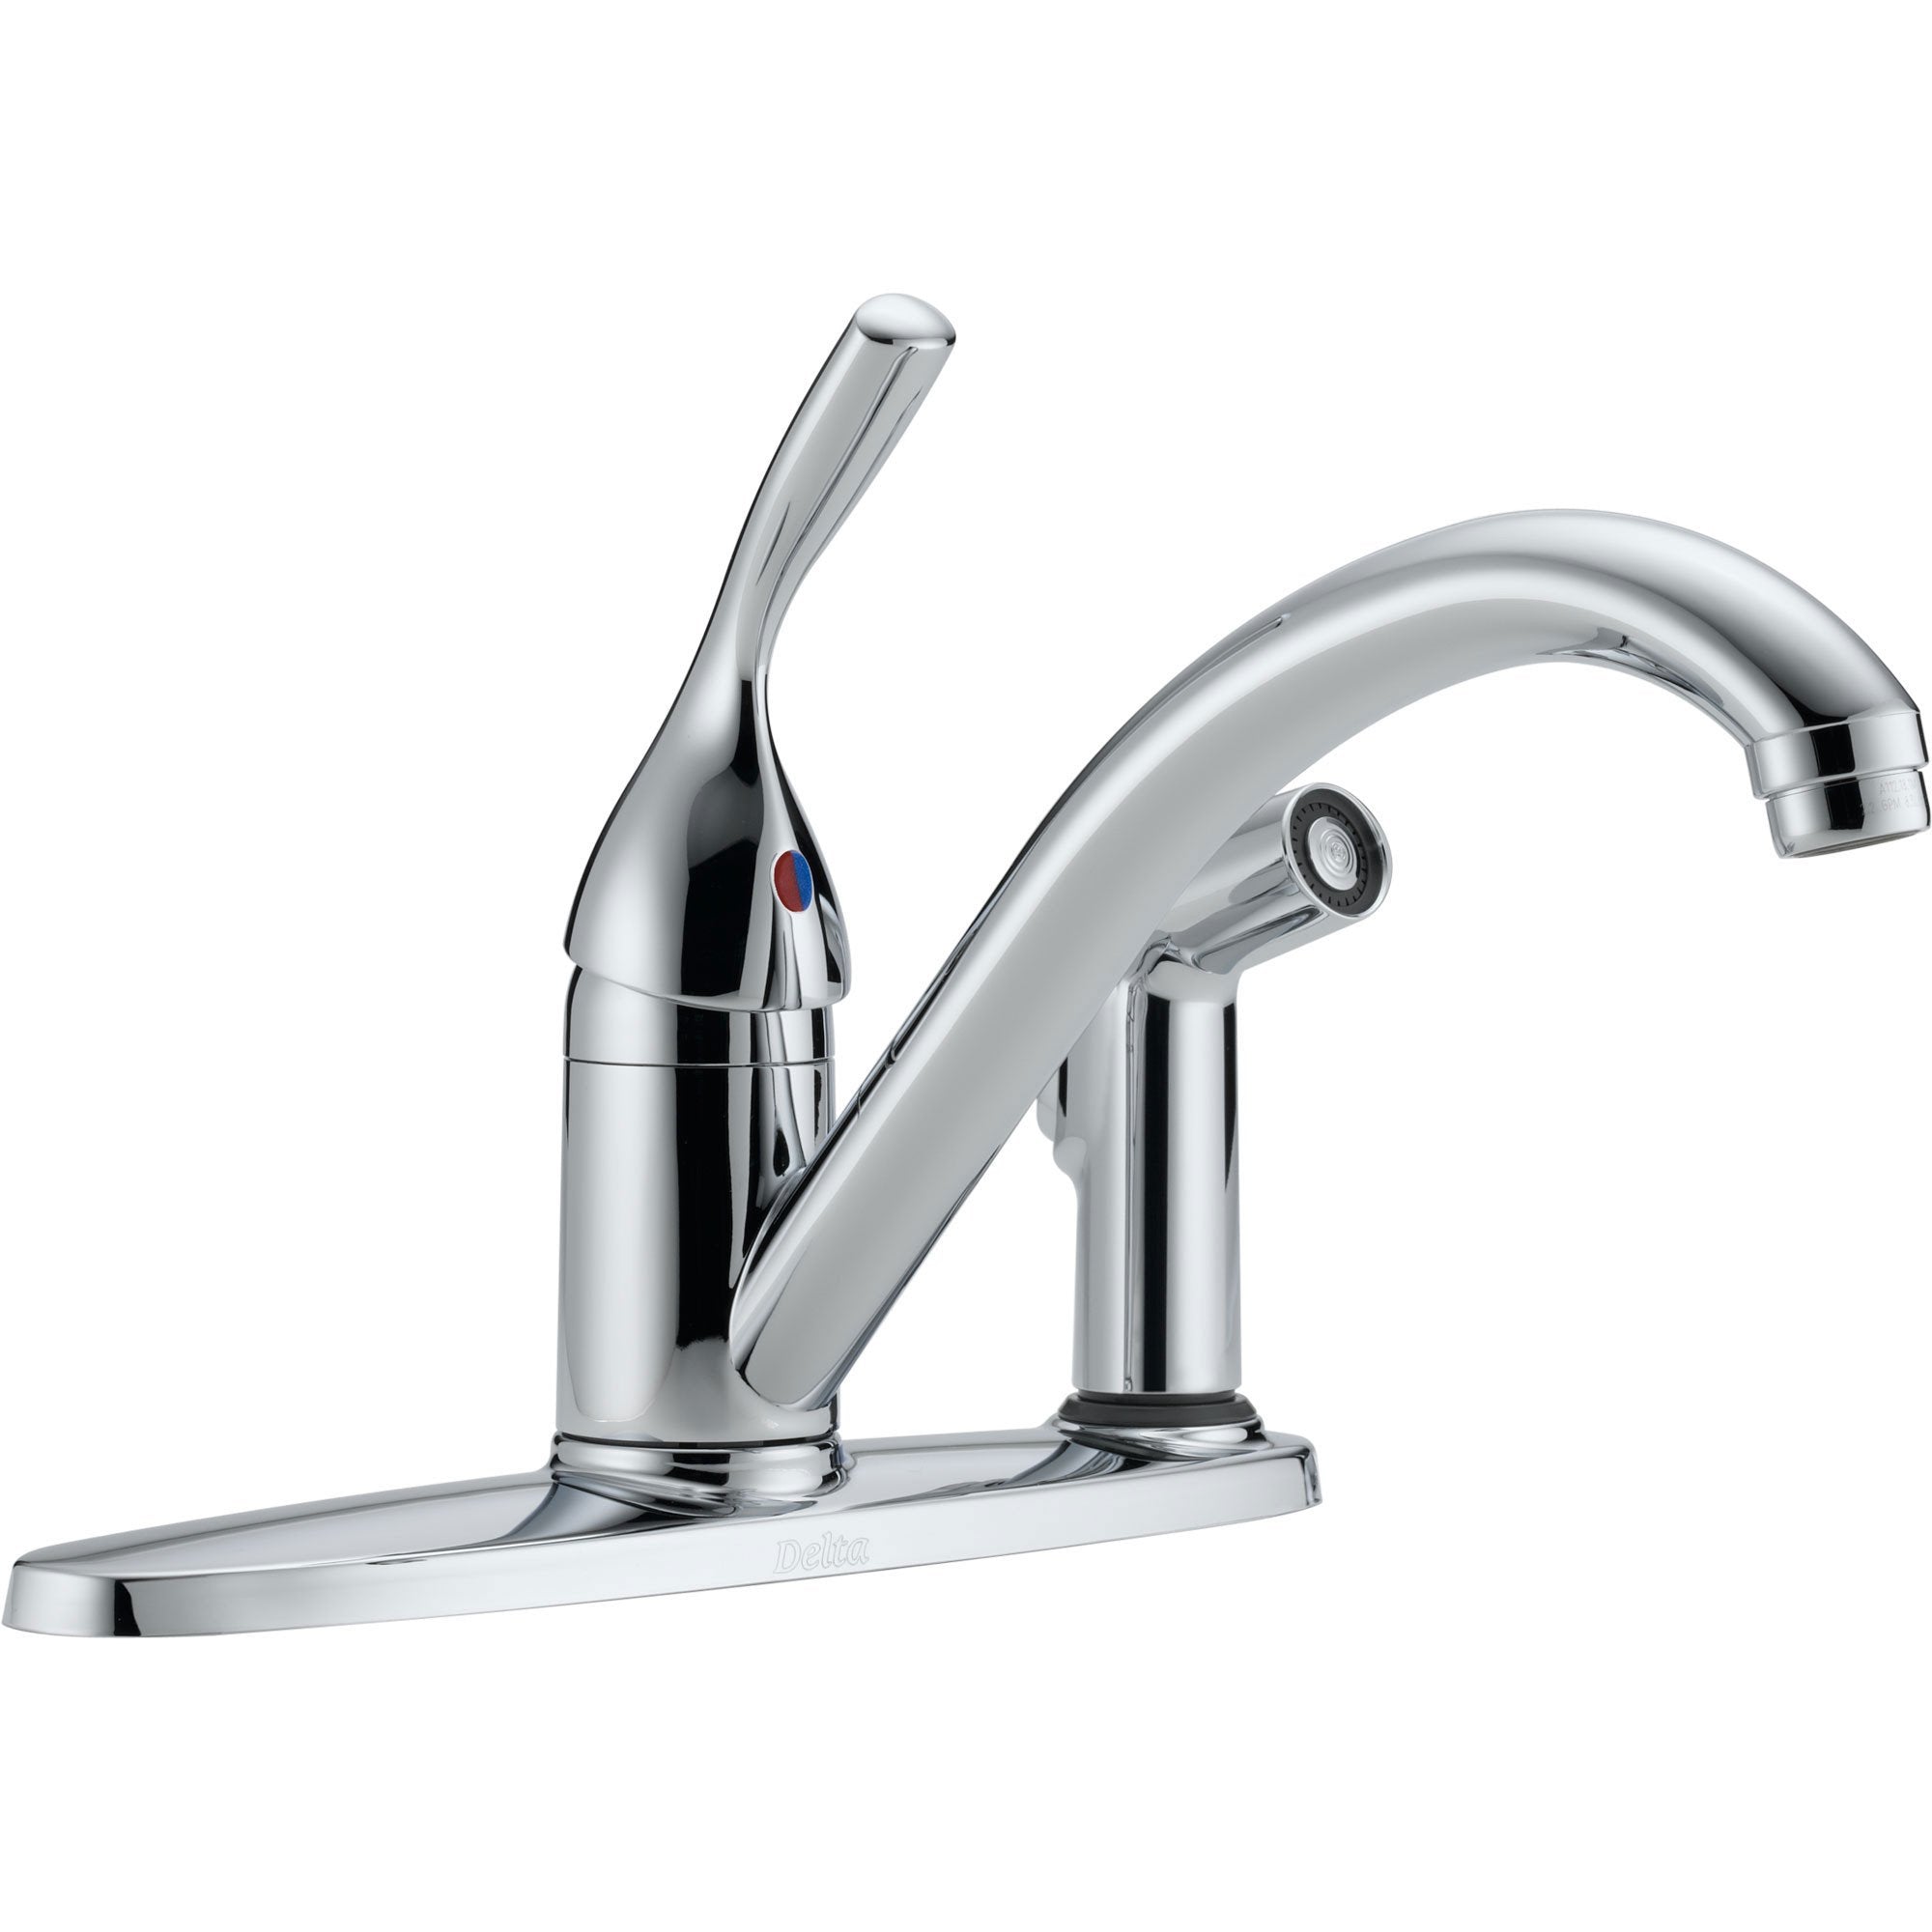 3 Hole Kitchen Faucets - Get A Three Hole Kitchen Sink Faucet Tagged 